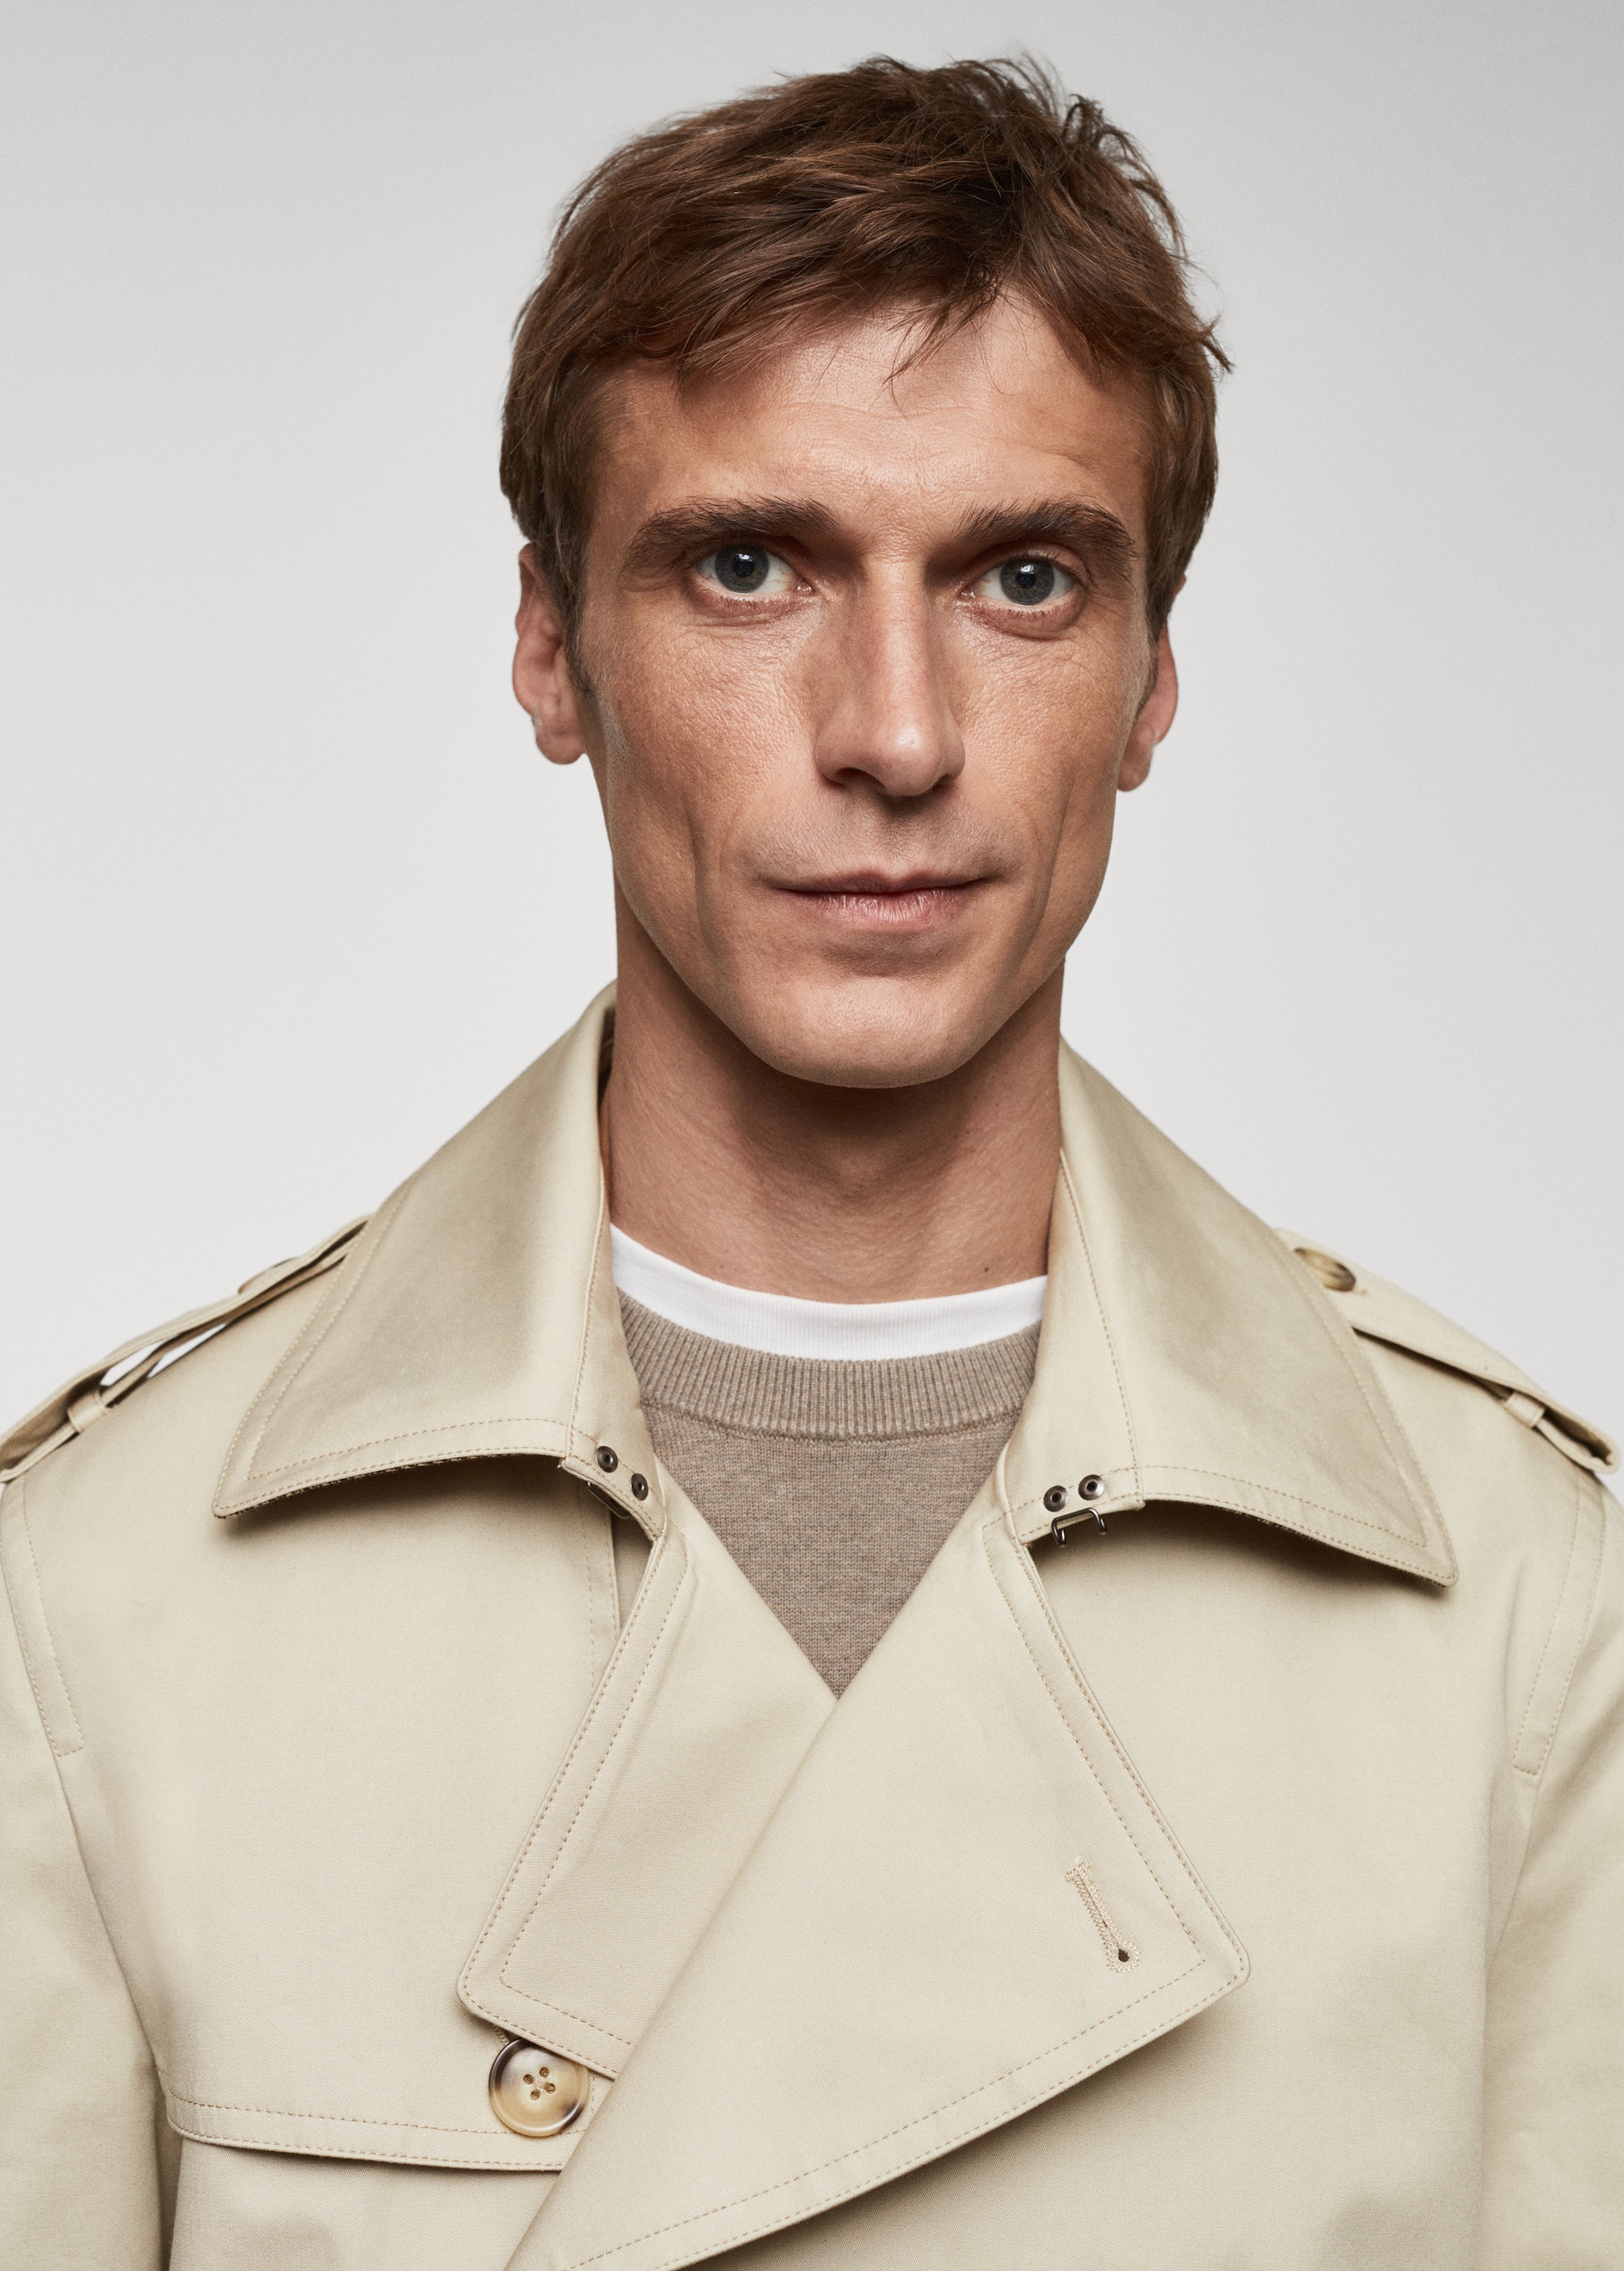 Classic water-repellent trench coat - Details of the article 1